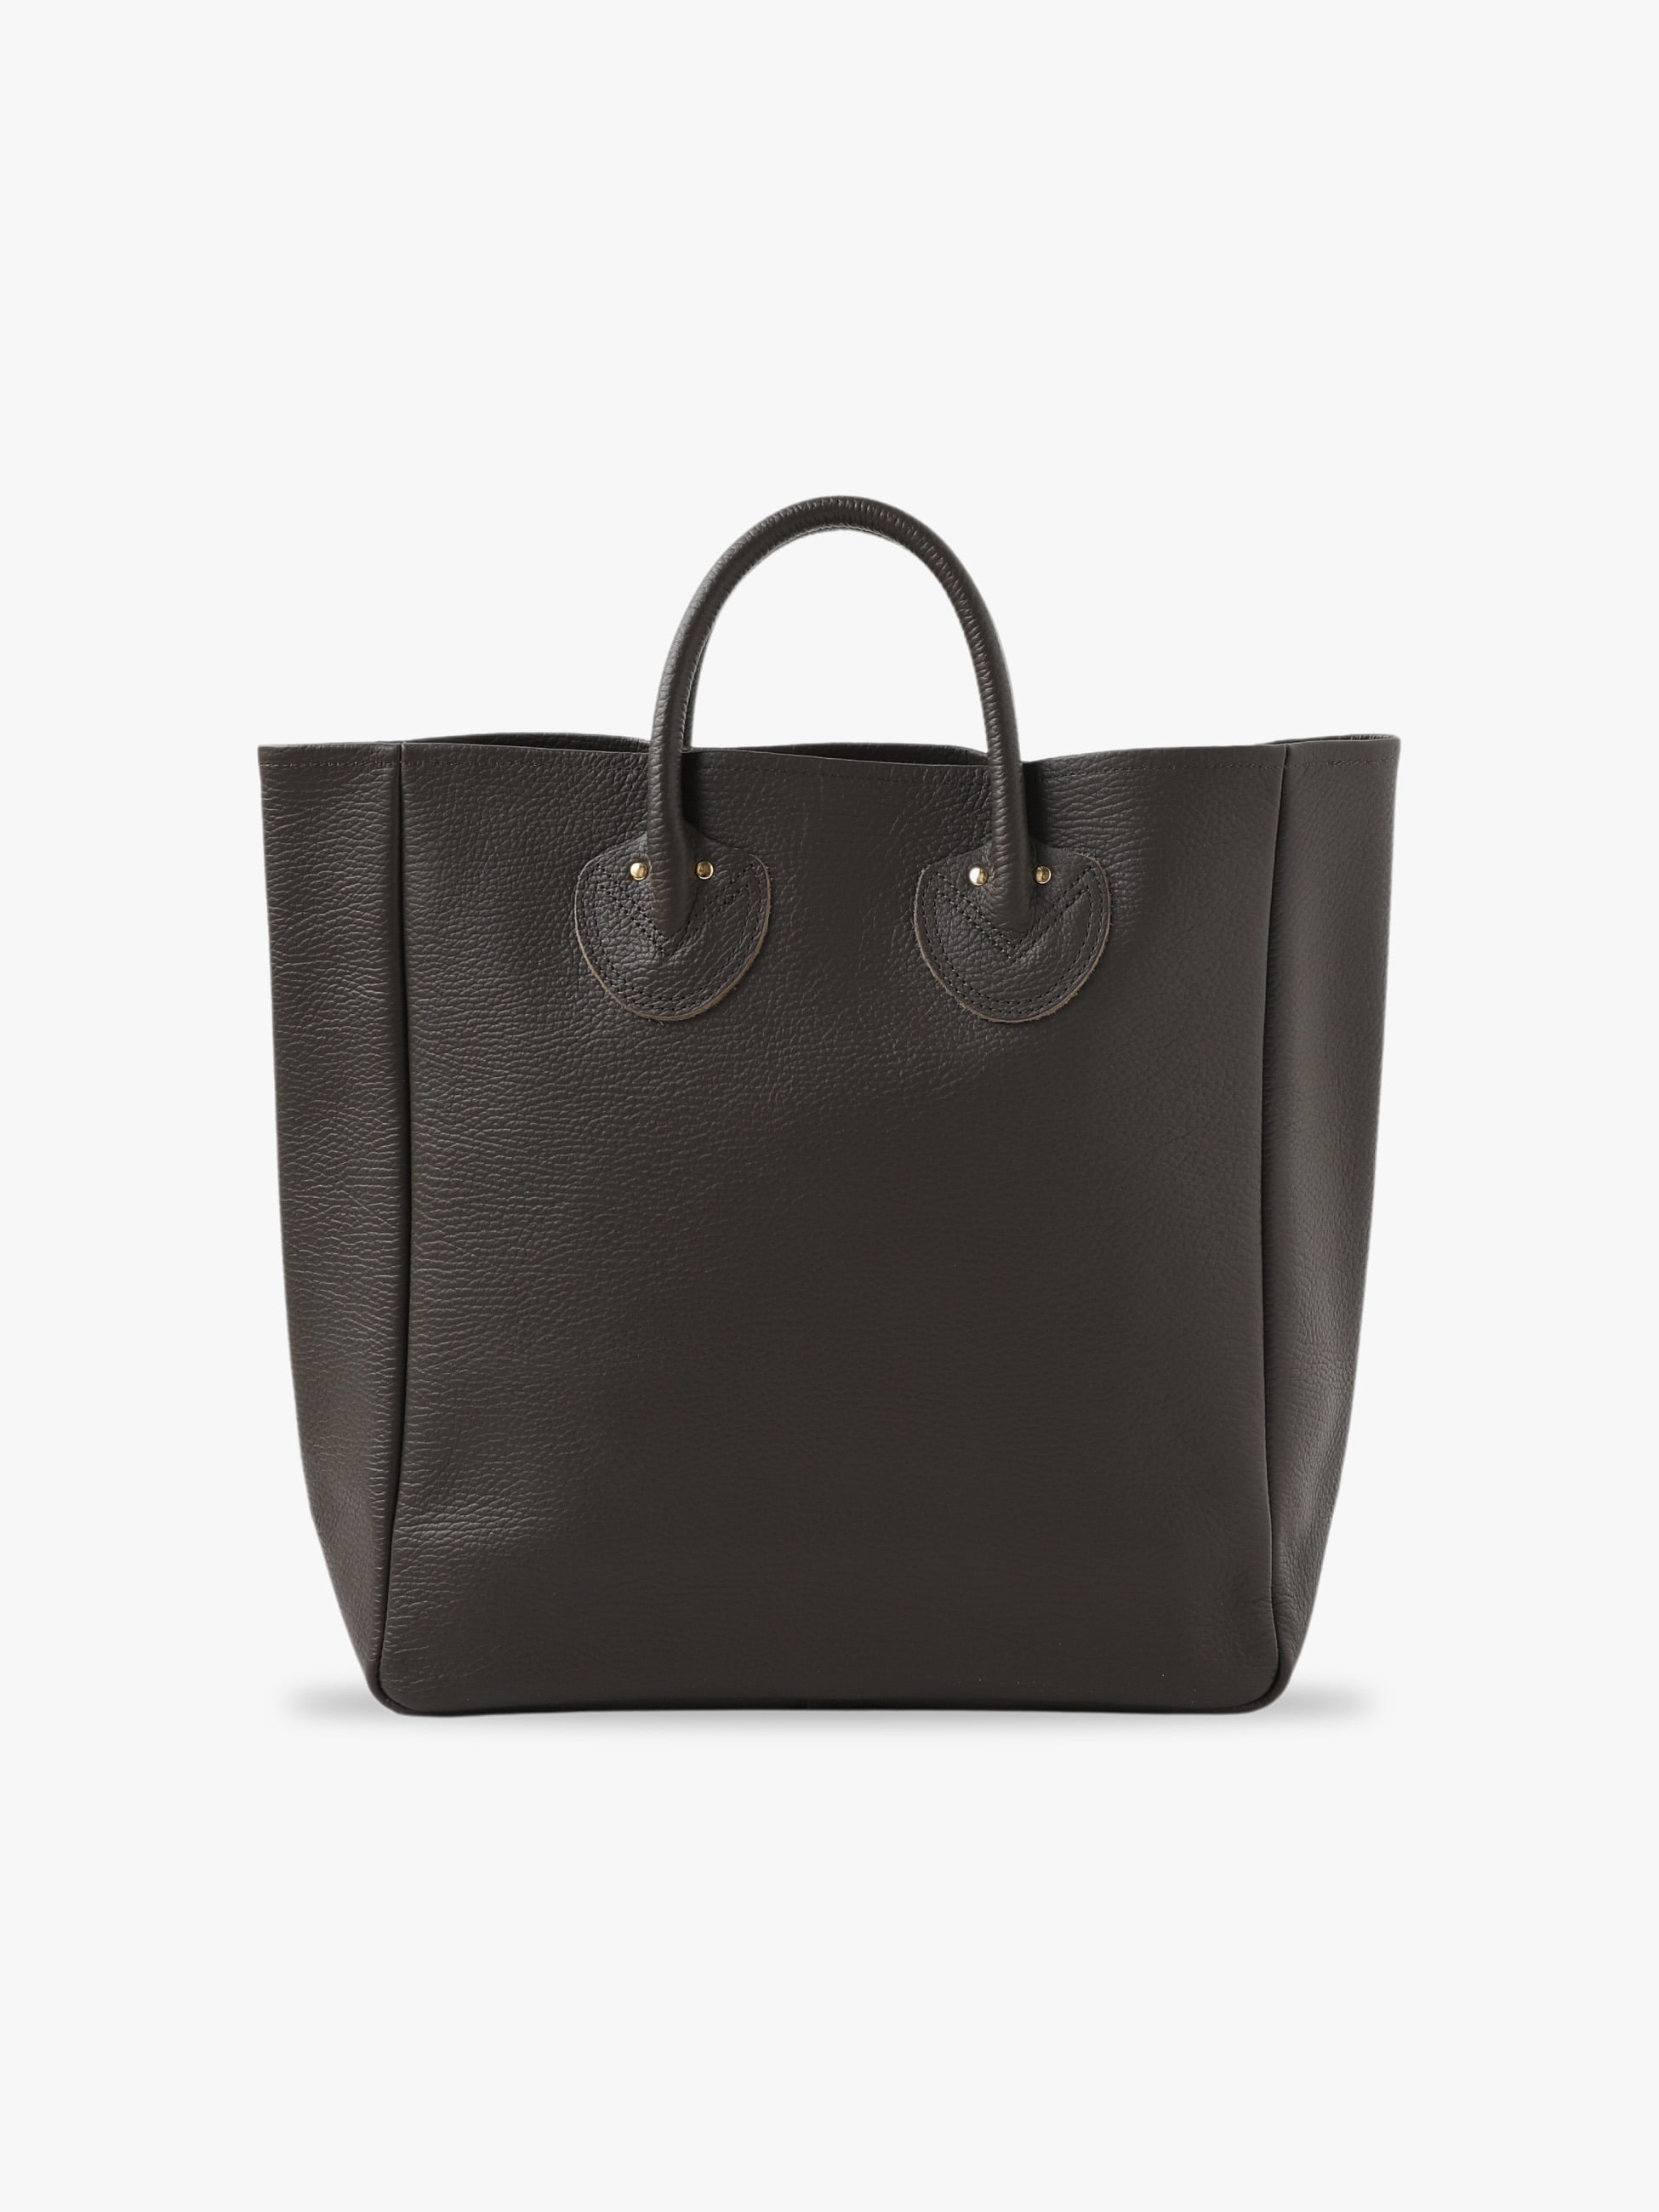 Embossed Leather Tote Bag (M)｜YOUNG & OLSEN the DRYGOODS STORE ...